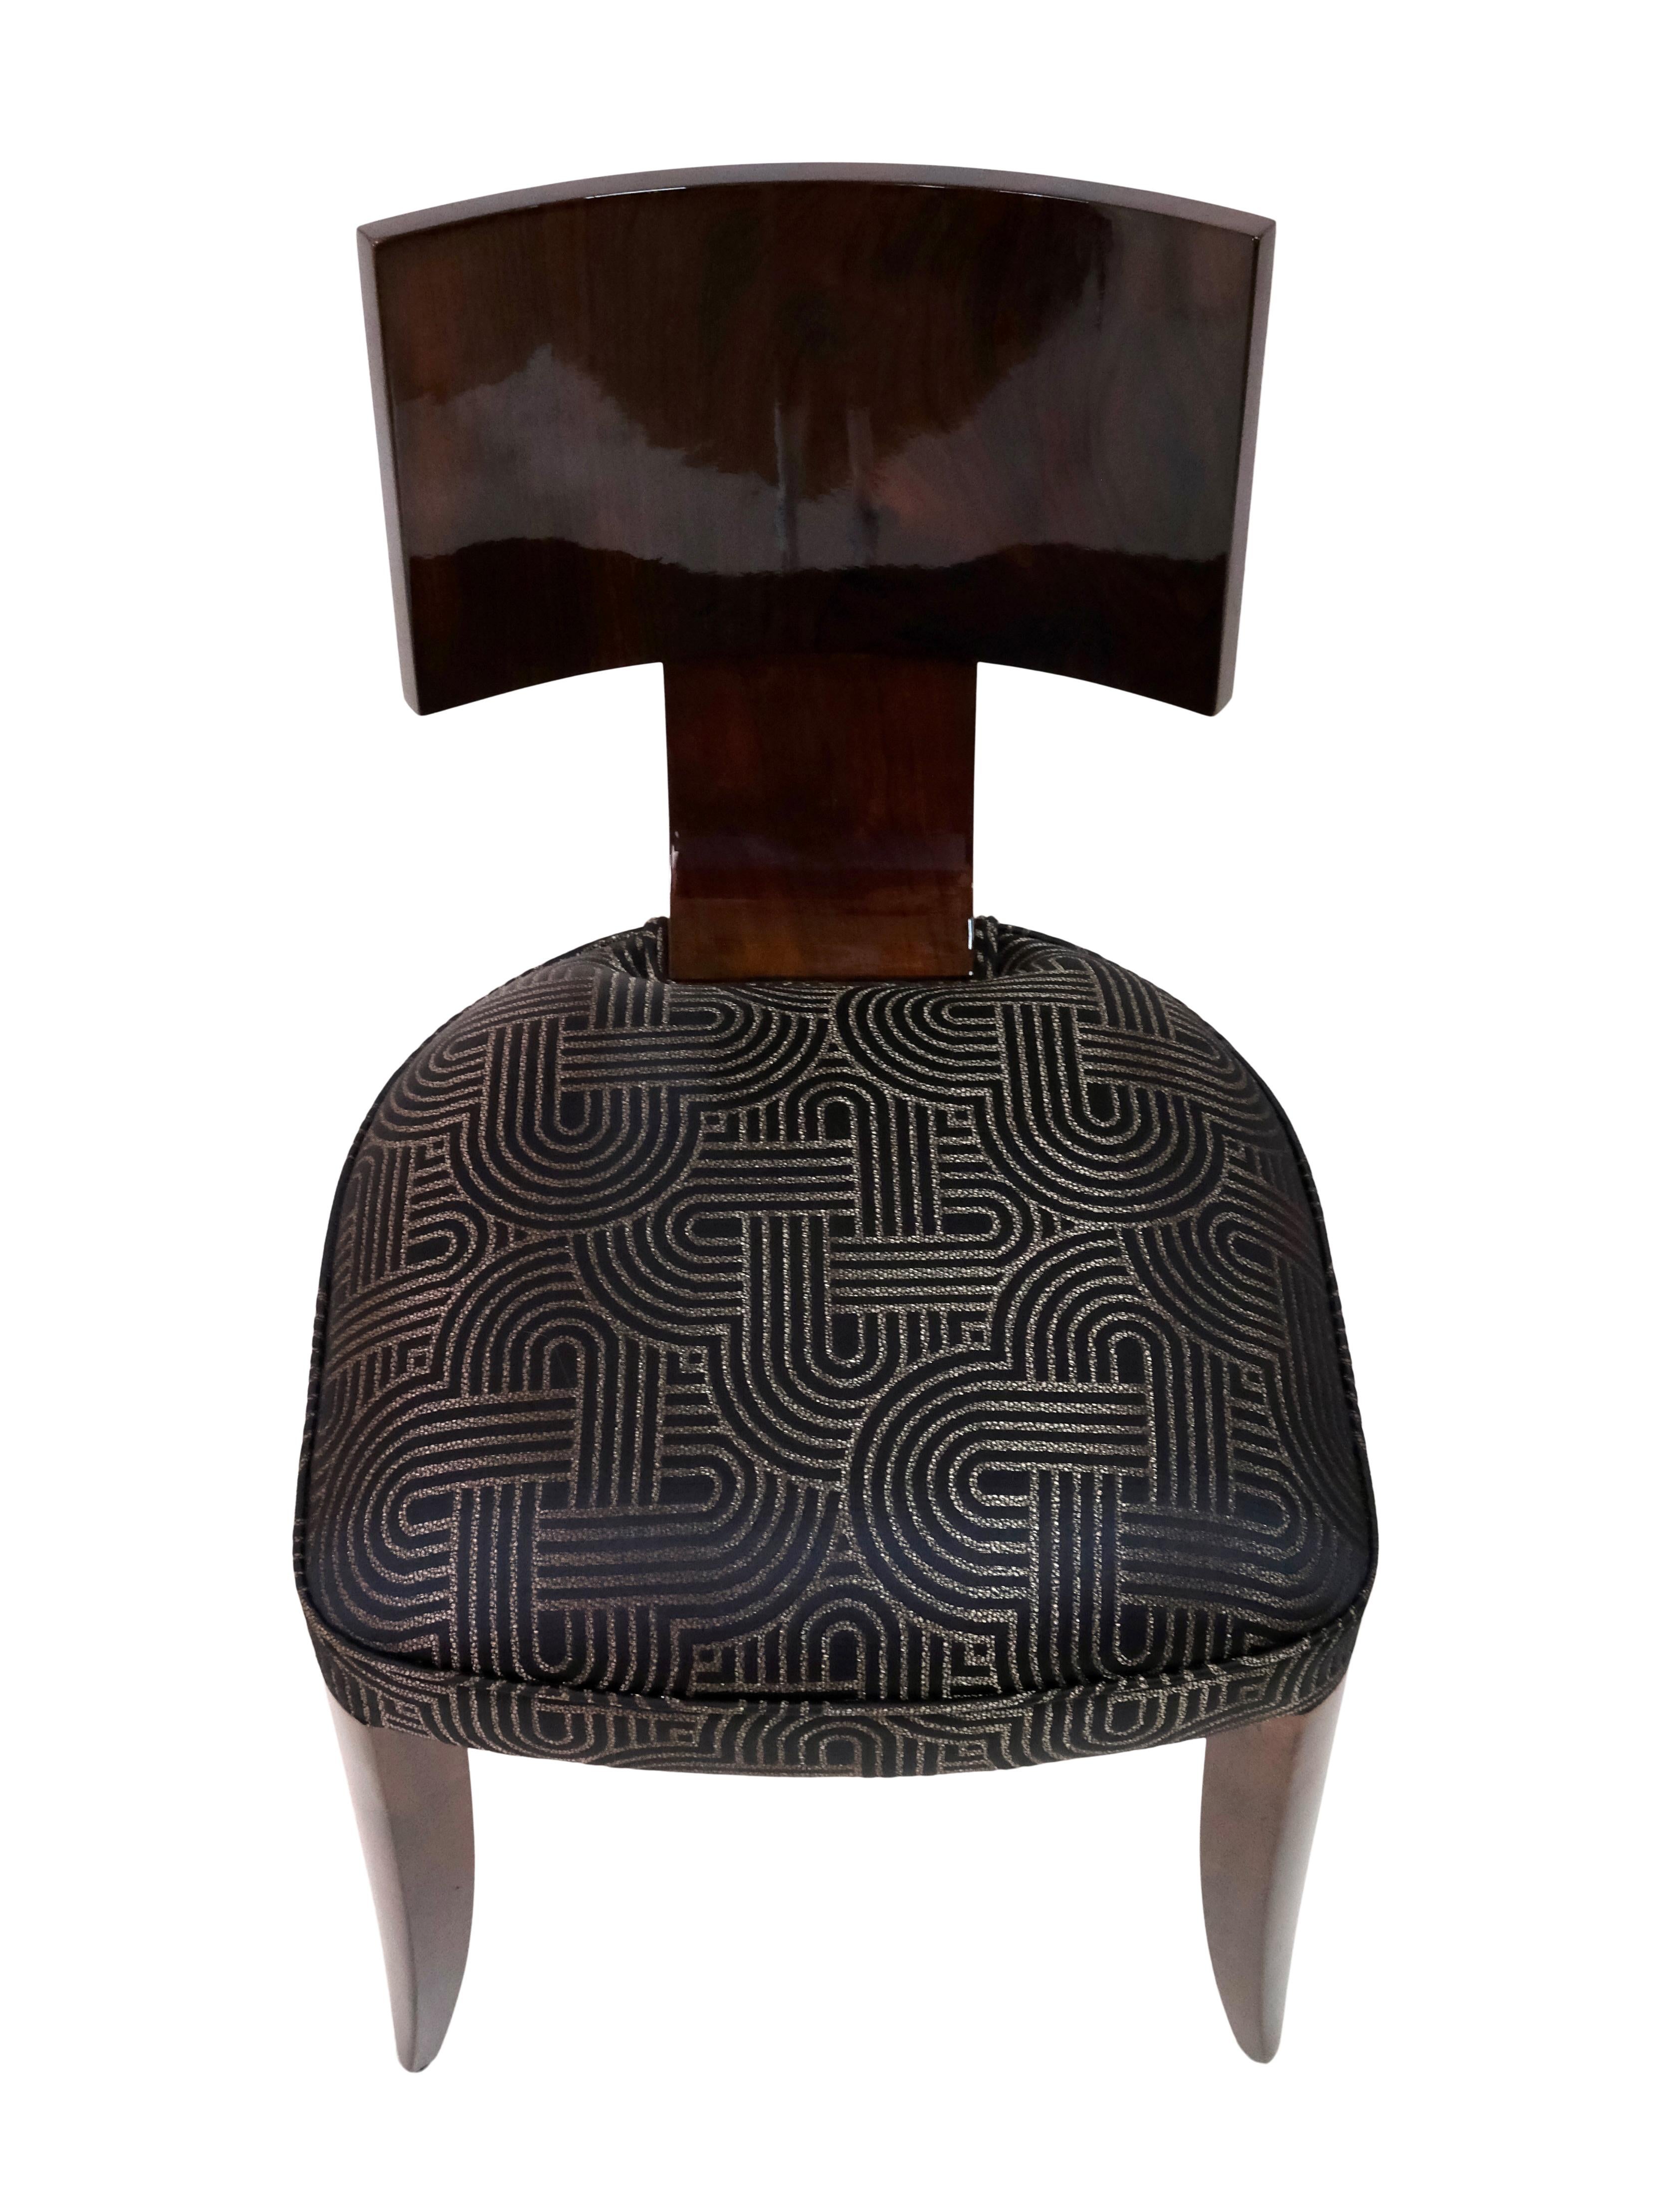 Lacquered Six Modernist Art Deco Dining Chairs from 1930s France